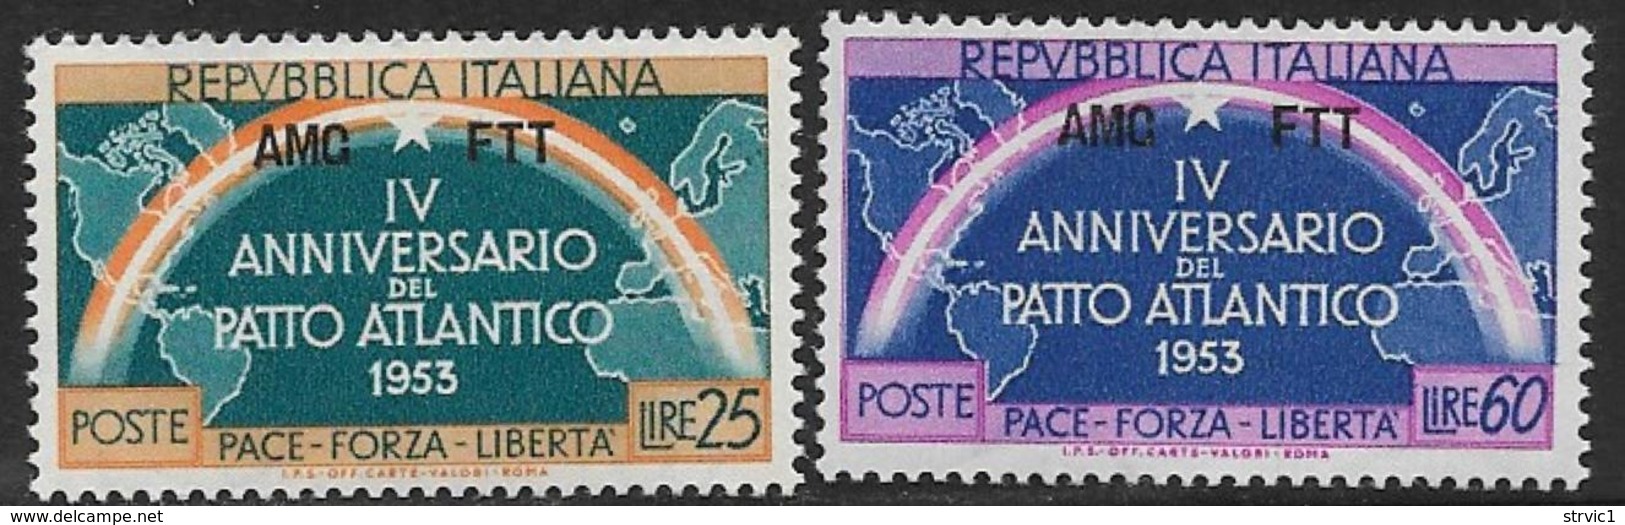 Trieste Zone A, Scott # 184-5 MNH Italy # 637-8 Overprinted, 1953 - Mint/hinged